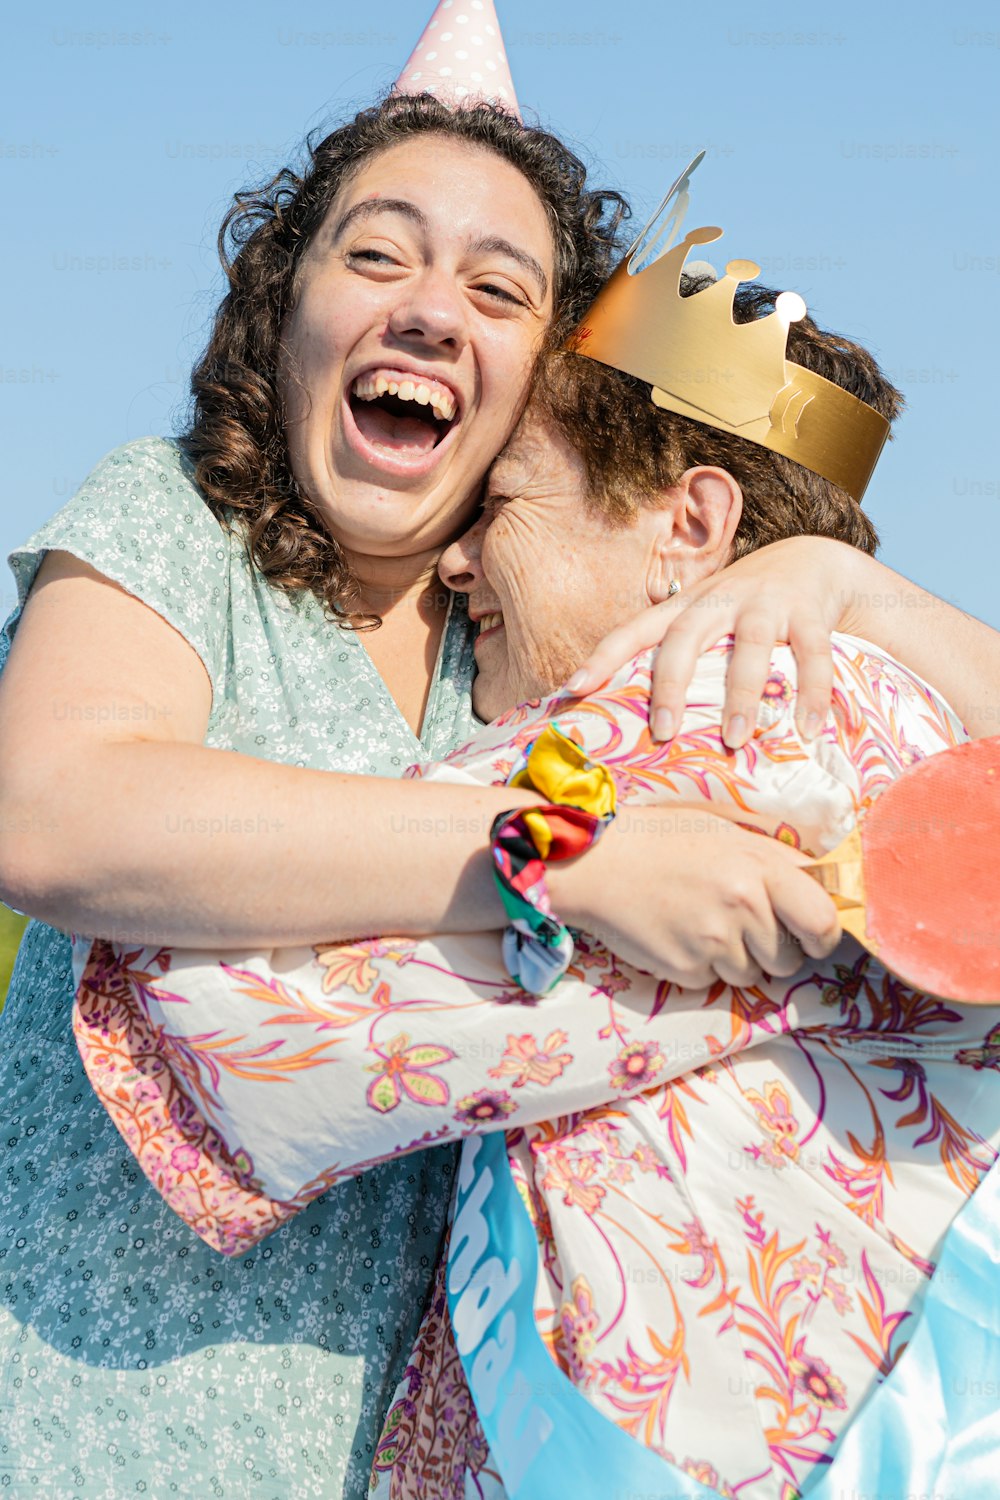 a woman hugging another woman with a crown on her head